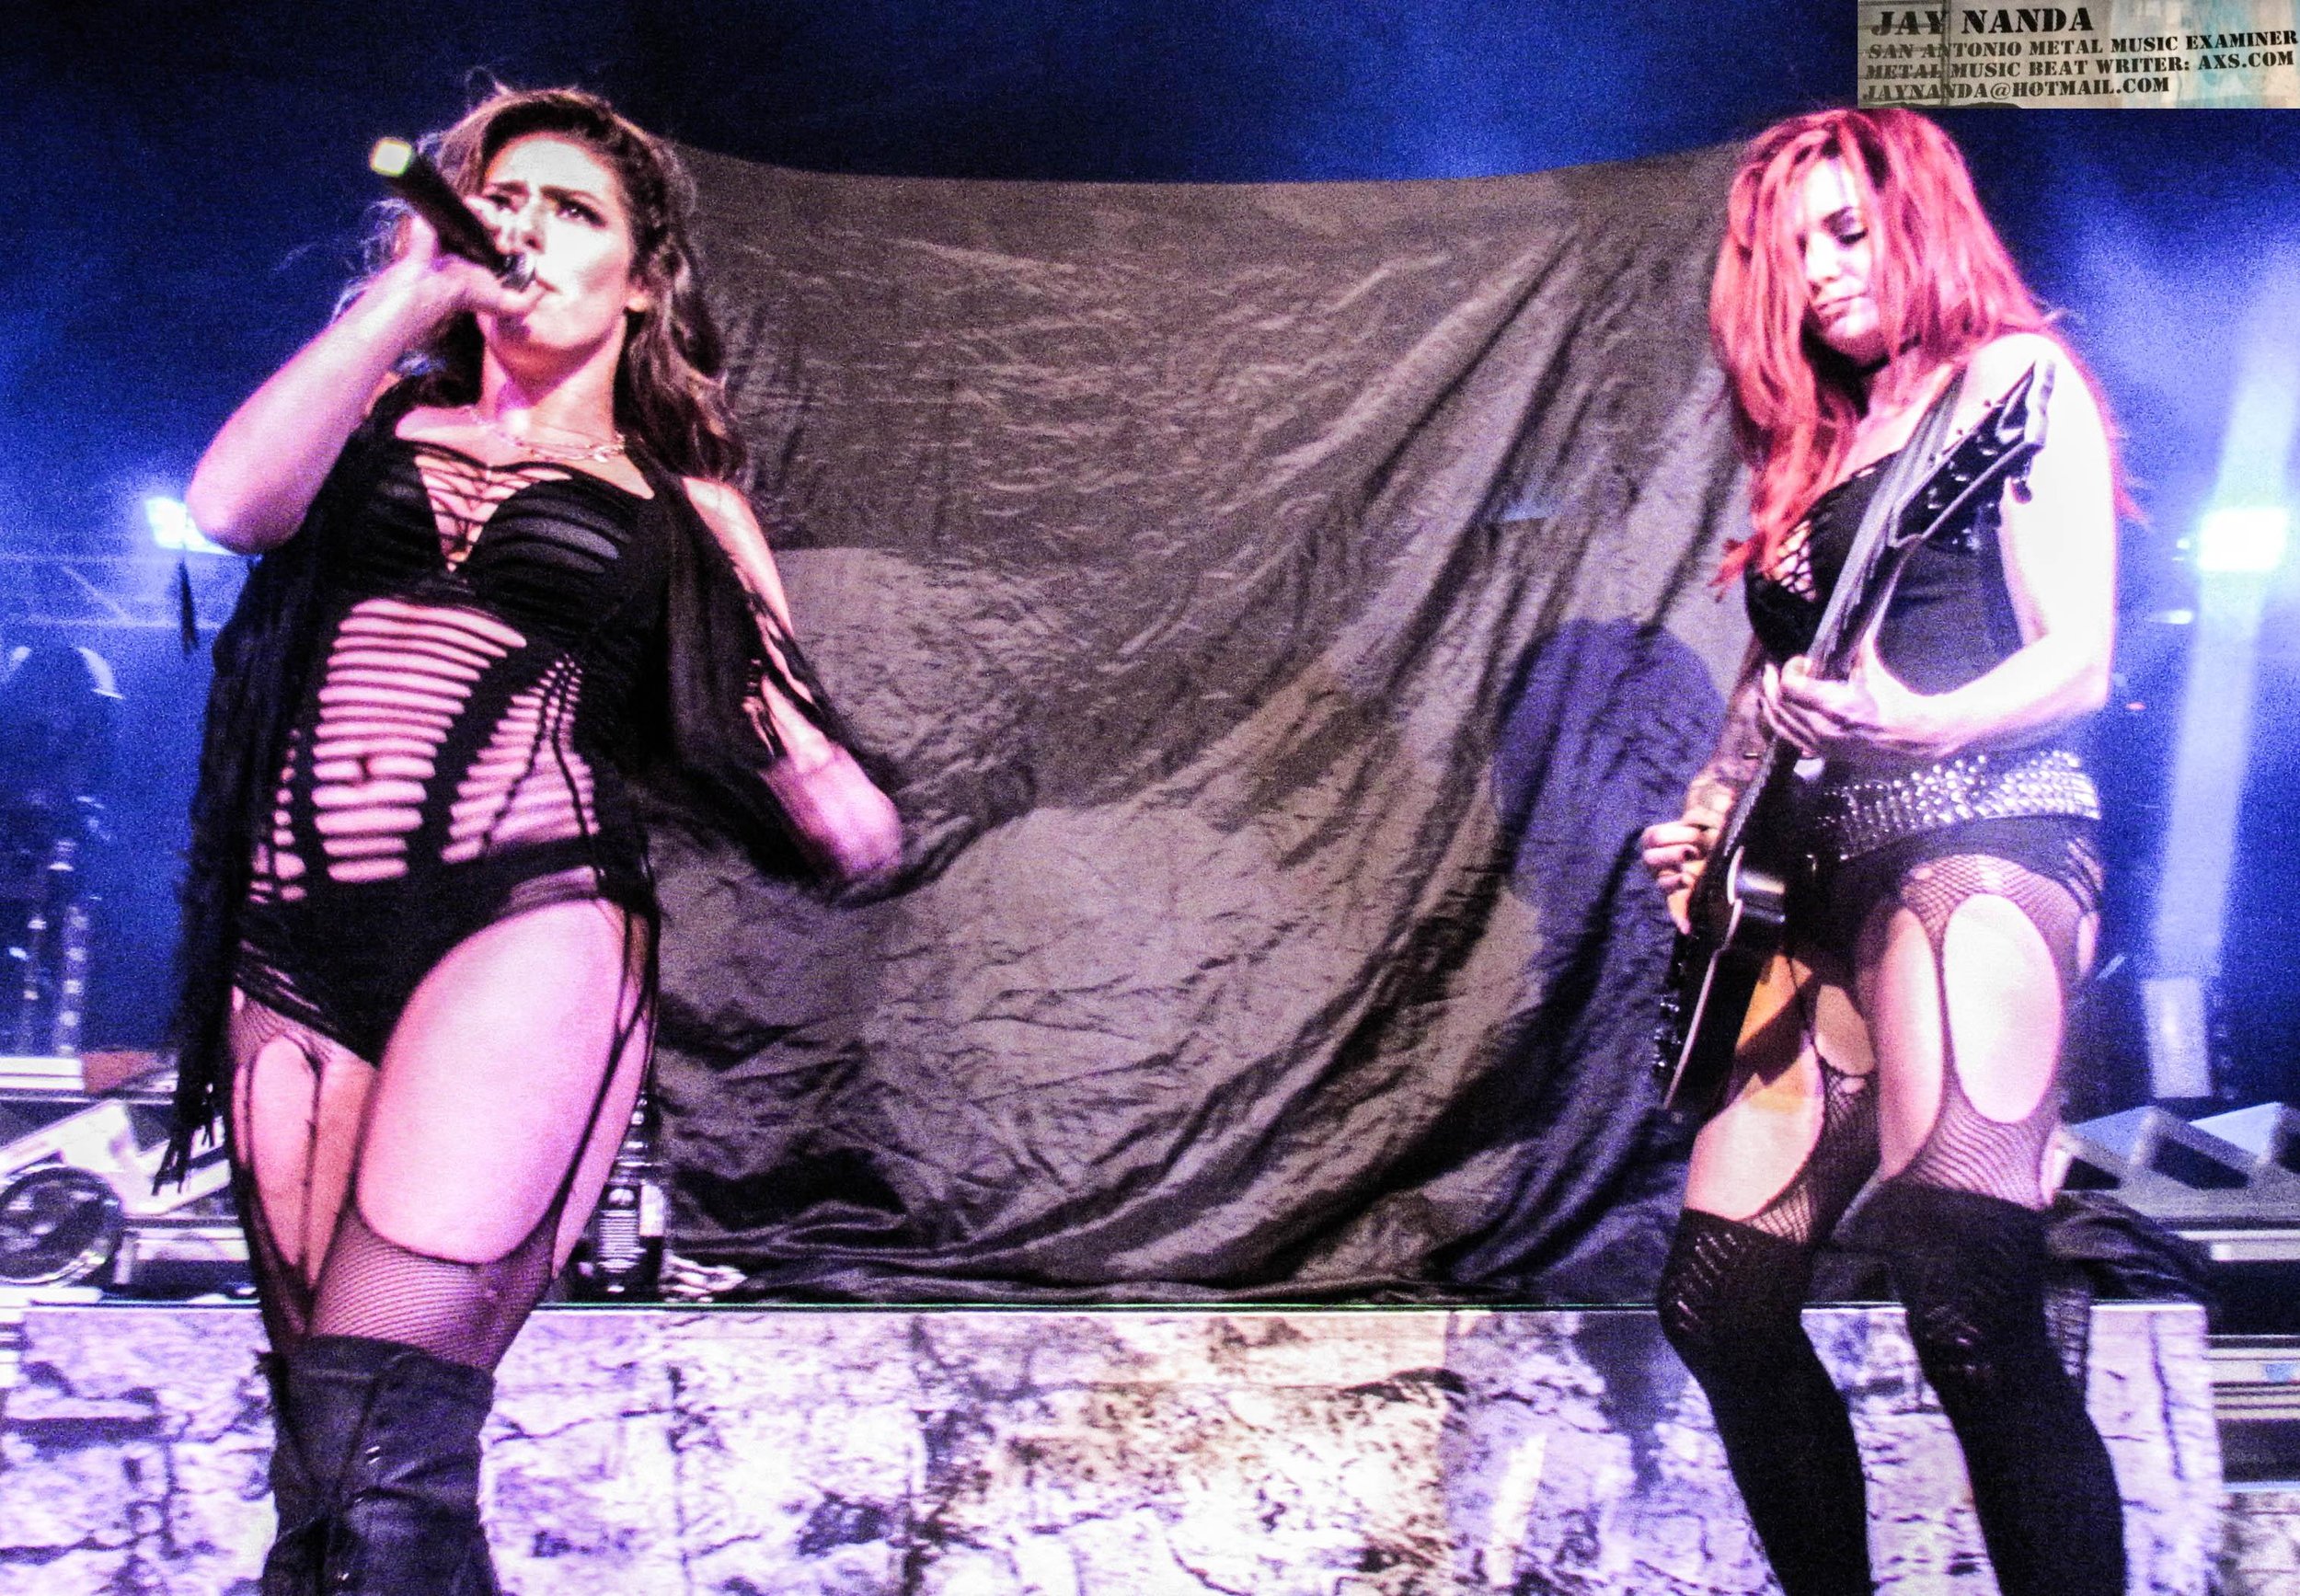  Taylor (right) plays the guitar while one of her dancers breaks out in song.  